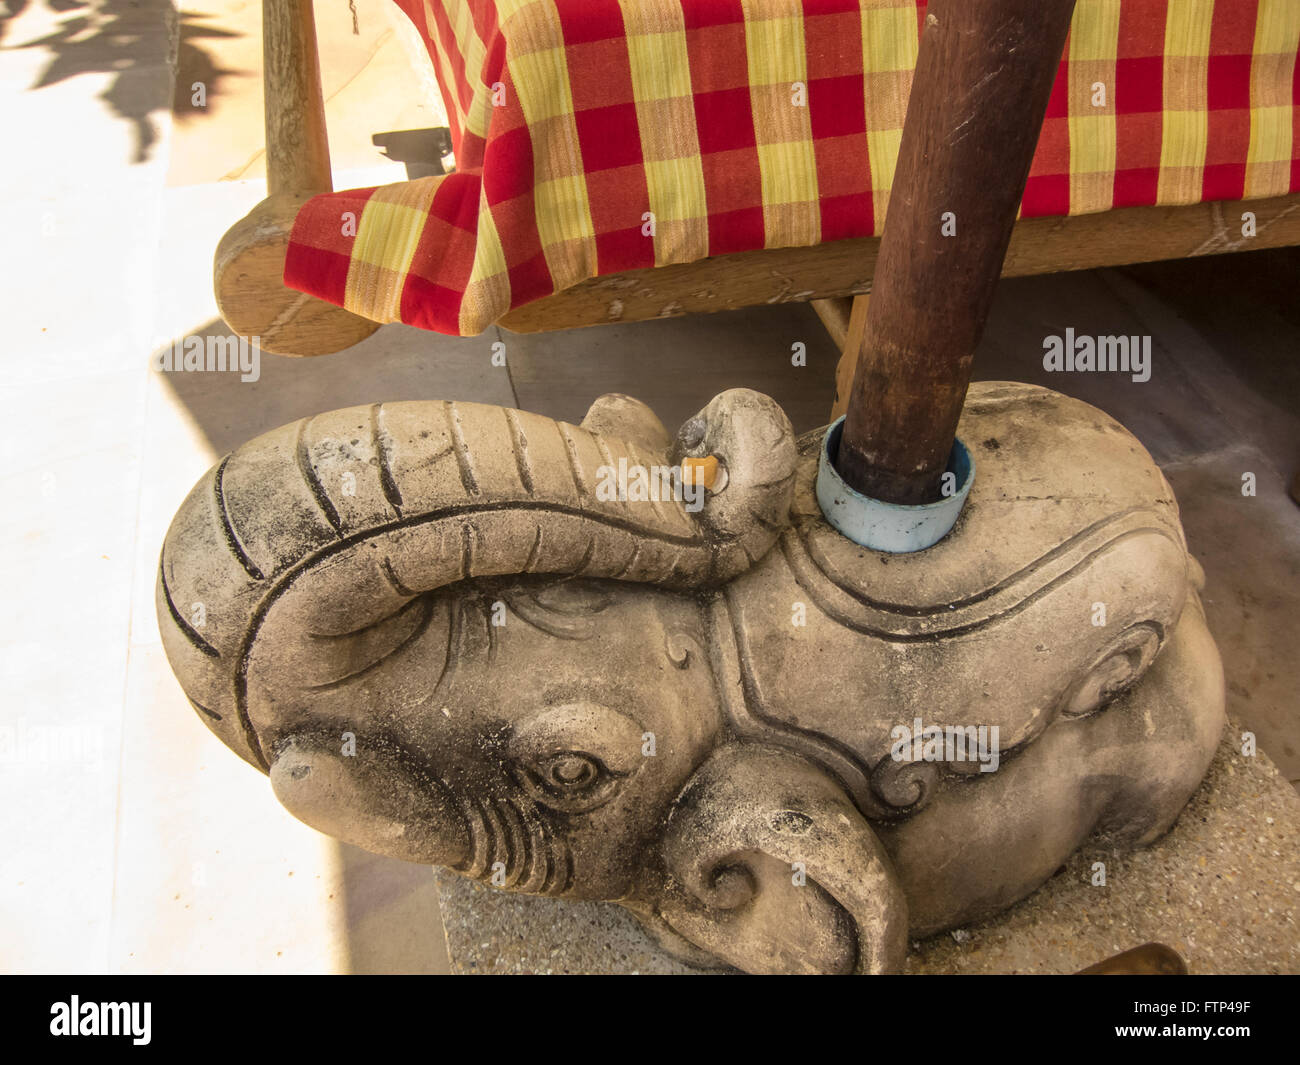 Cigarette smokers, what can I use as an ash tray in this no smoking area. Cigarette butt extinguished on an ornamental elephant. Stock Photo